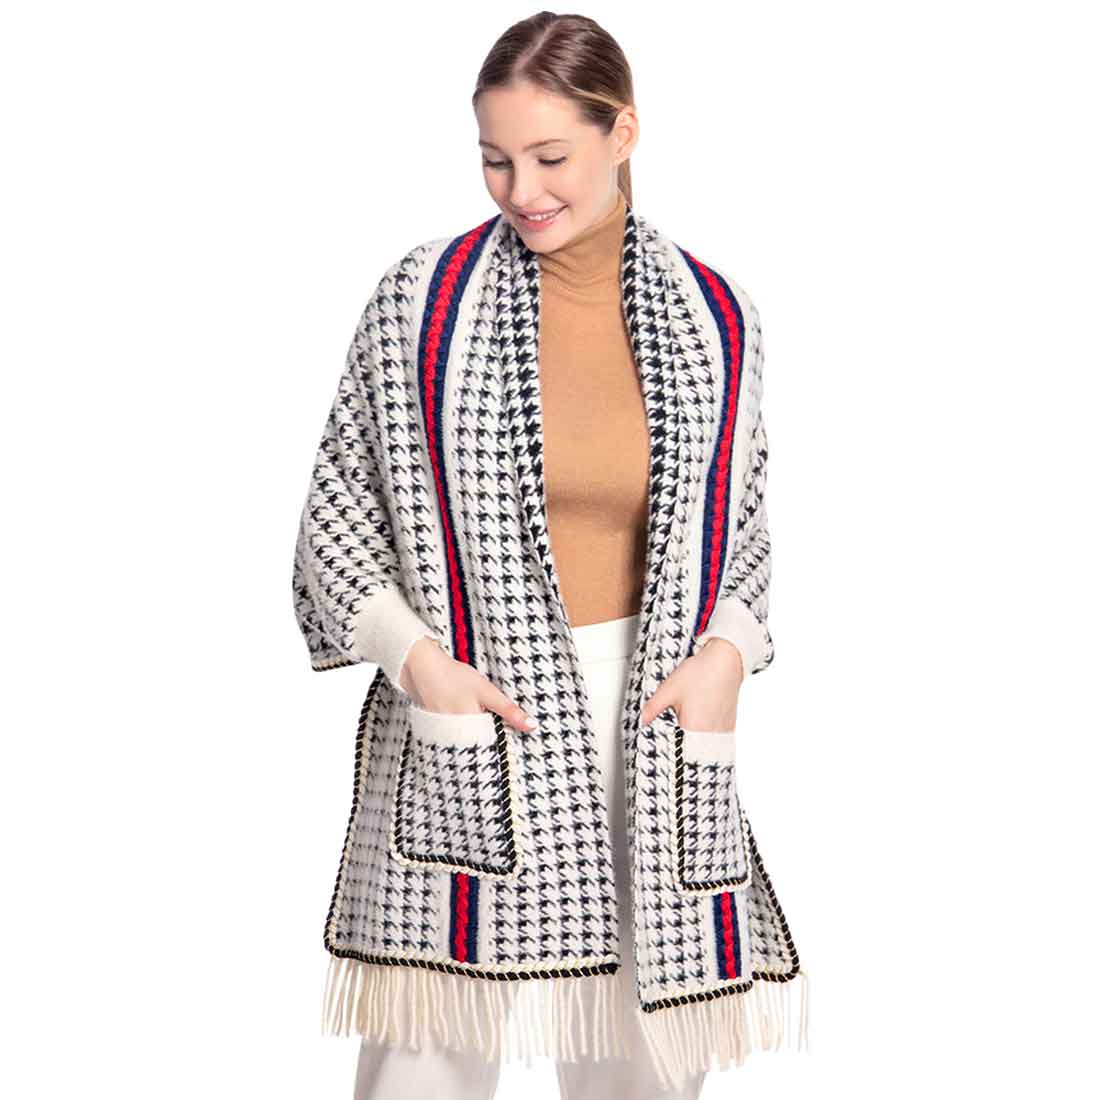 White Houndstooth Patterned Poncho, is the perfect representation of beauty and comfortability for this winter. It will surely make you stand out with its beautiful color variation. It goes with every winter outfit and gives you a unique yet beautiful outlook everywhere. You can throw it on over so many pieces elevating any casual outfit! Perfect Gift for Wife, Mom, Birthday, Holiday, Christmas, Anniversary, Fun Night Out. Stay warm and toasty!